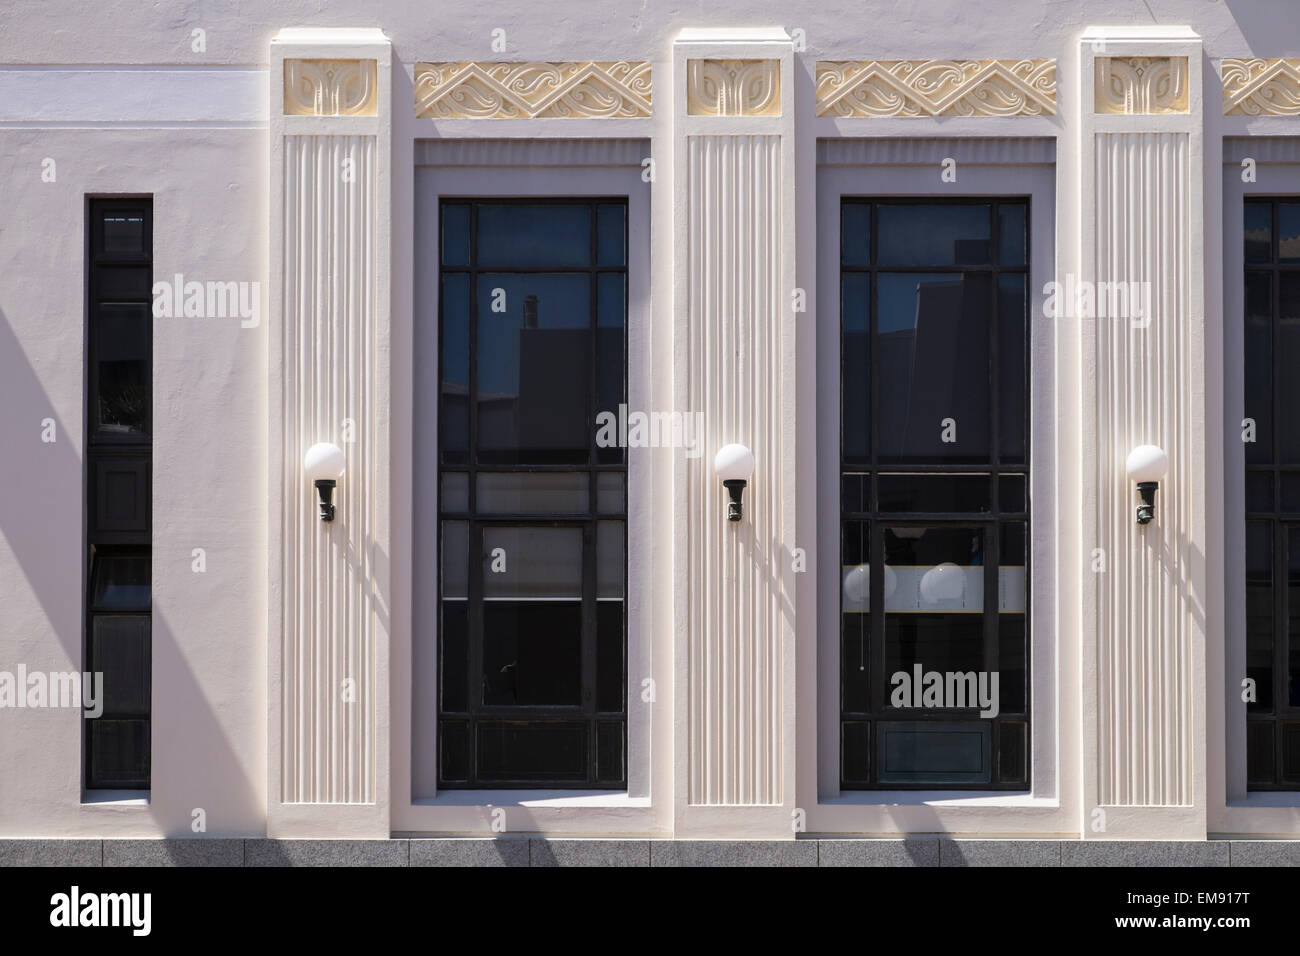 The ASB bank building, art deco architecture in Napier, New Zealand. Stock Photo